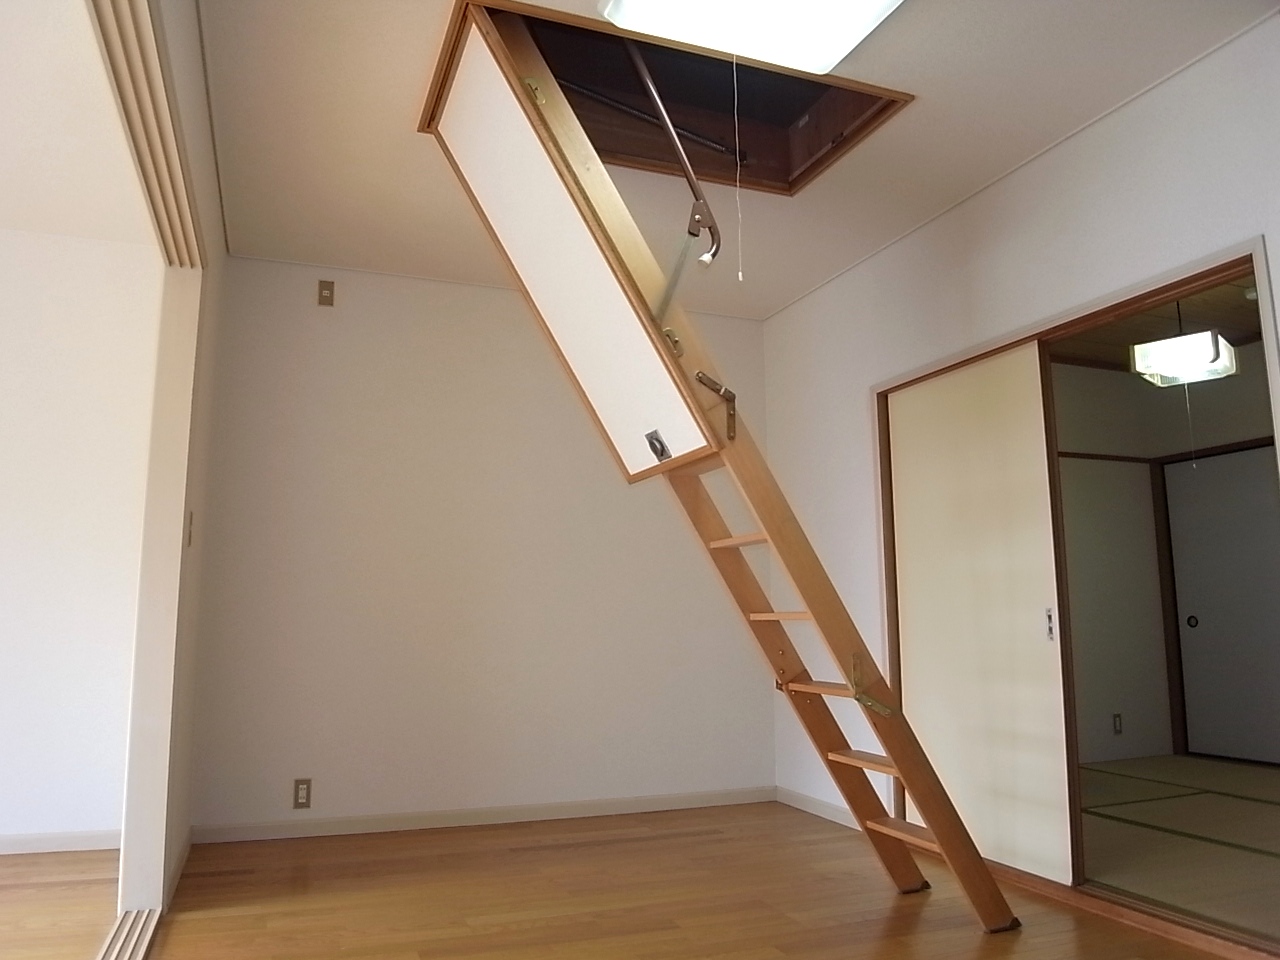 Living and room. LDK ・ Ceiling storage stairs to lift